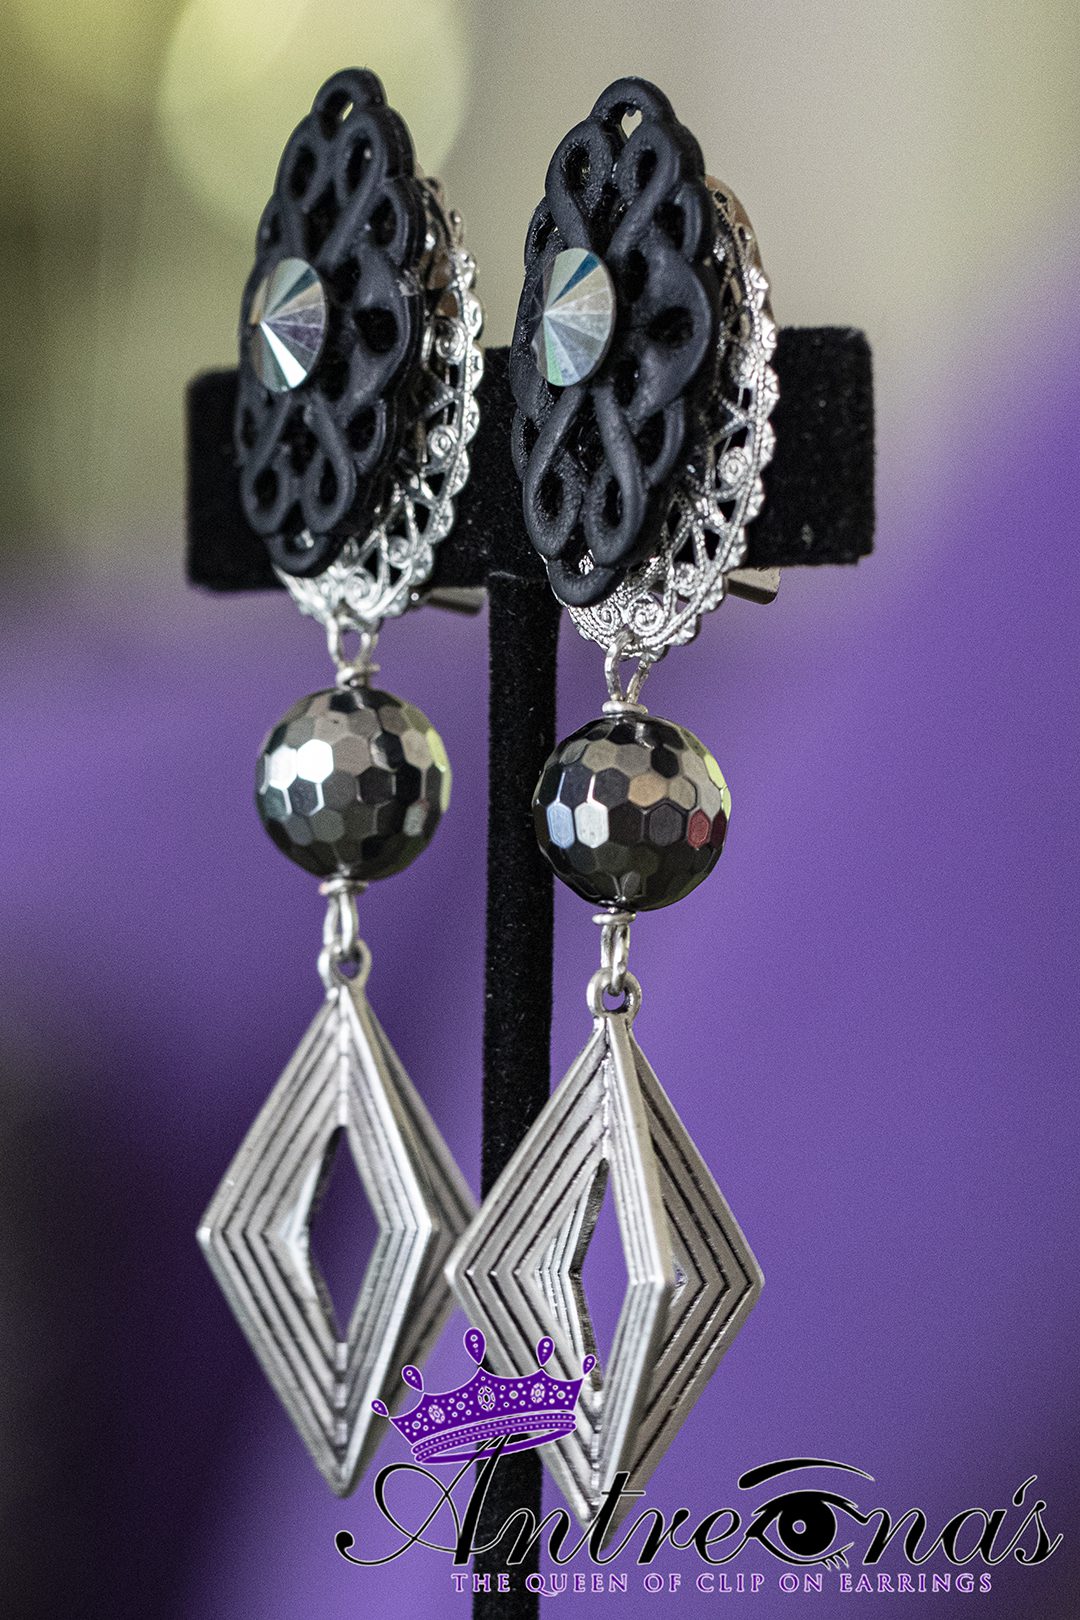 Image clip on painless earrings.